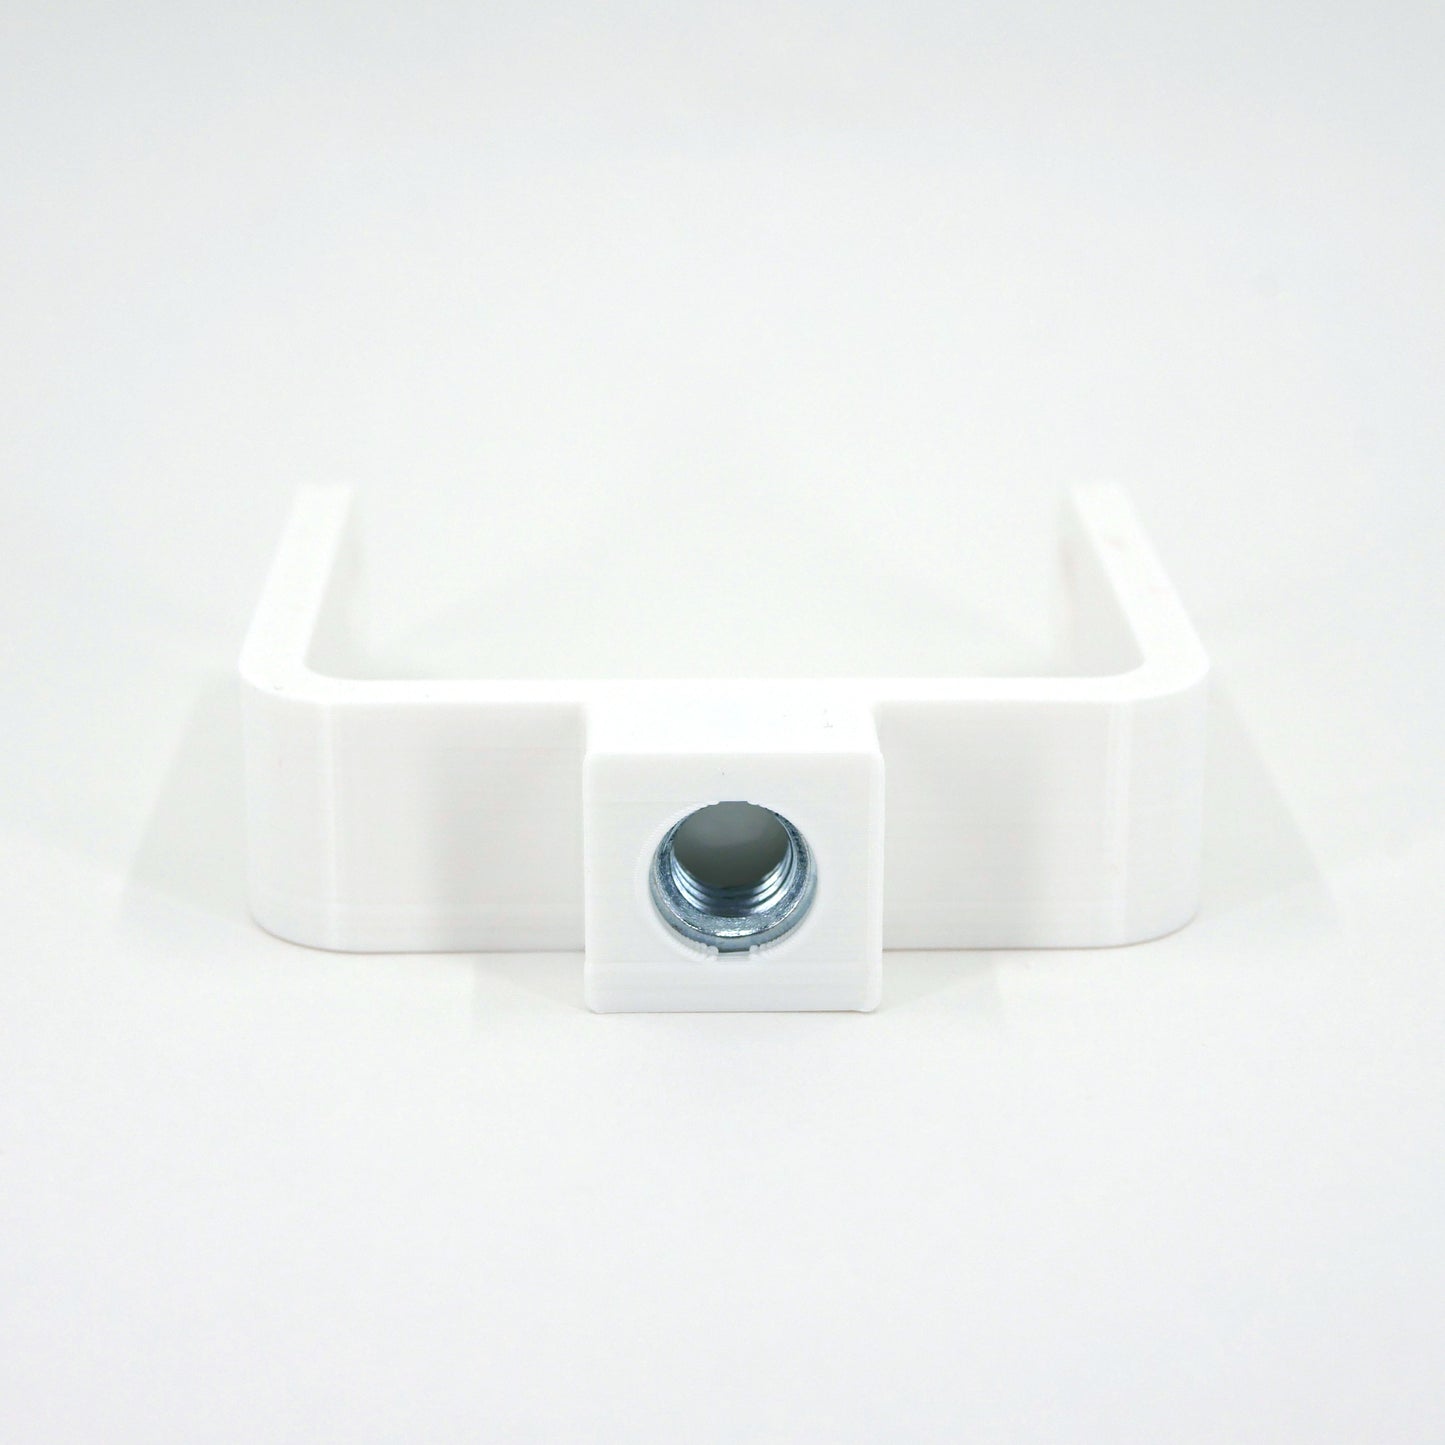 The back of a white microphone mount for the FIFINE K678 microphone.